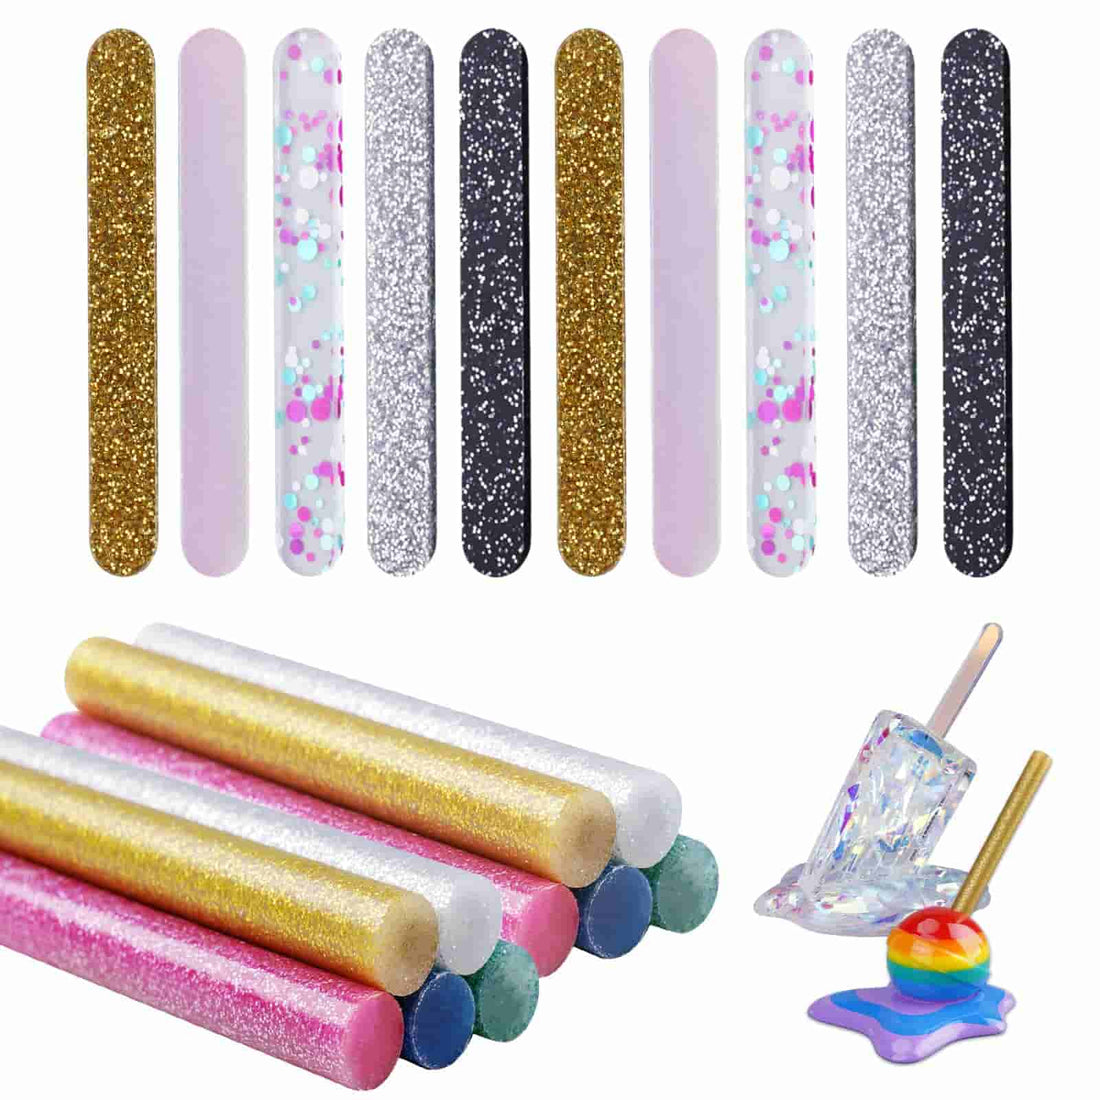 LET'S RESIN 26 Resin Art Supplies, Shiny Holographic Stickers, Transparent  Resin Stickers for Card Making, Scrapbook, DIY Jewelry, Resin Stickers with